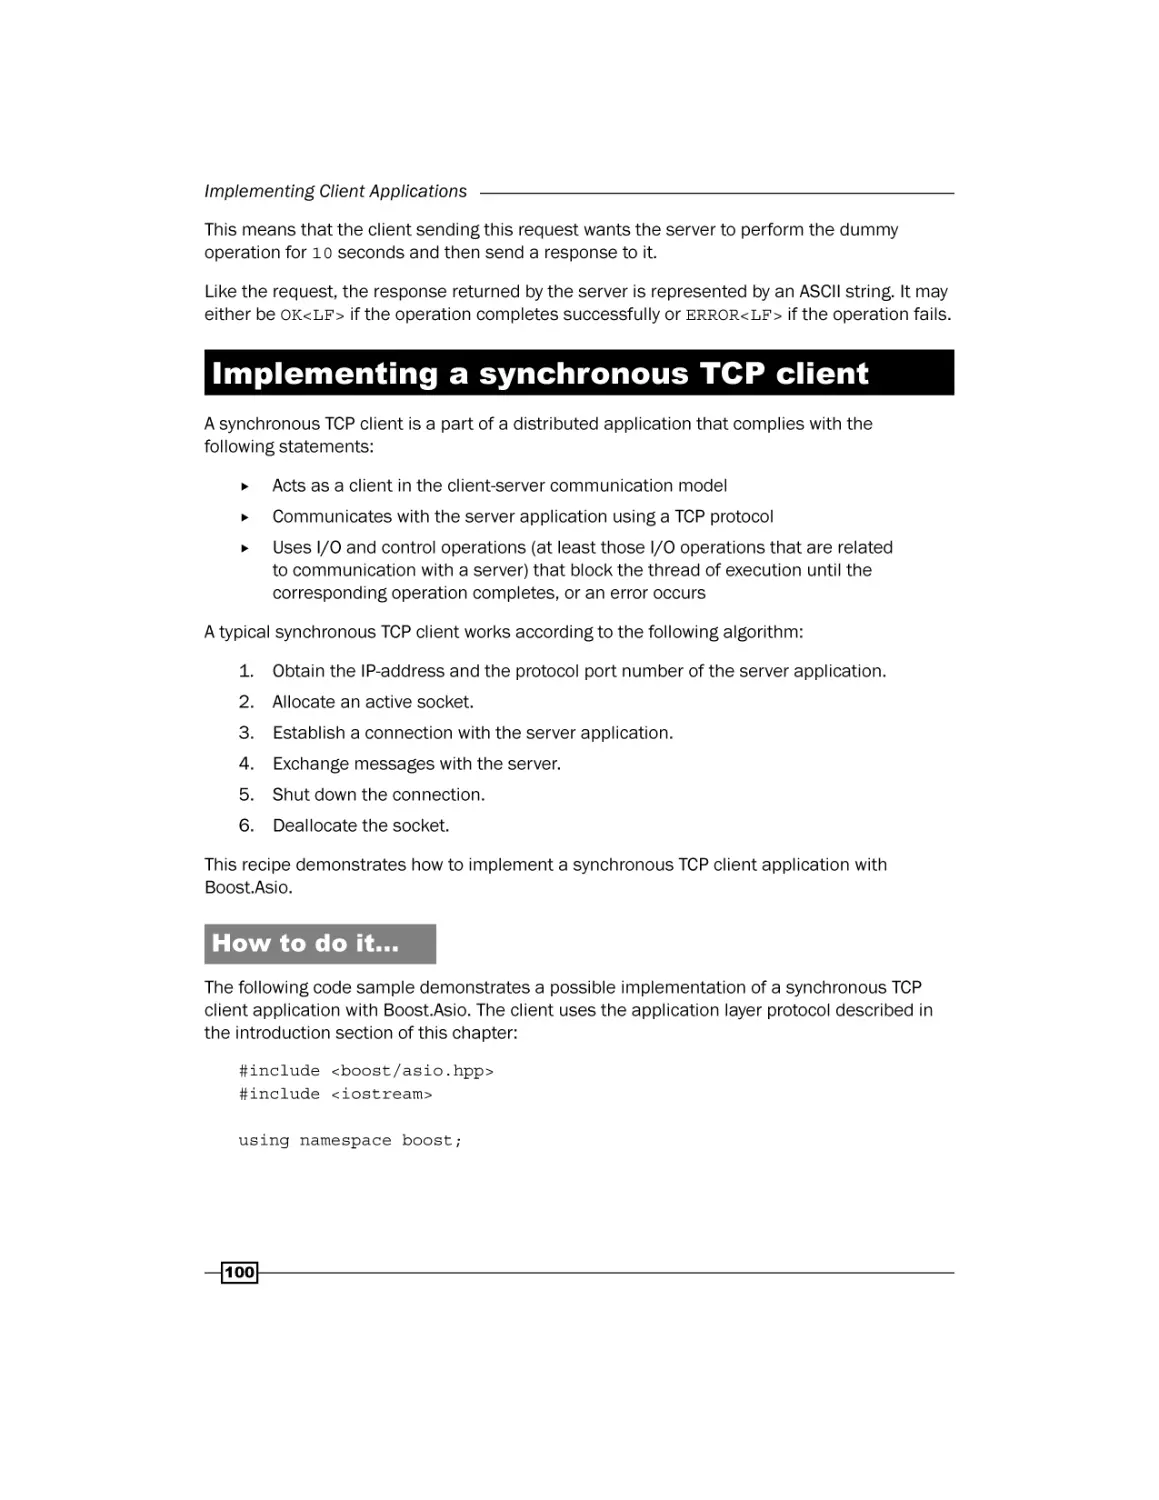 Implementing a synchronous TCP client